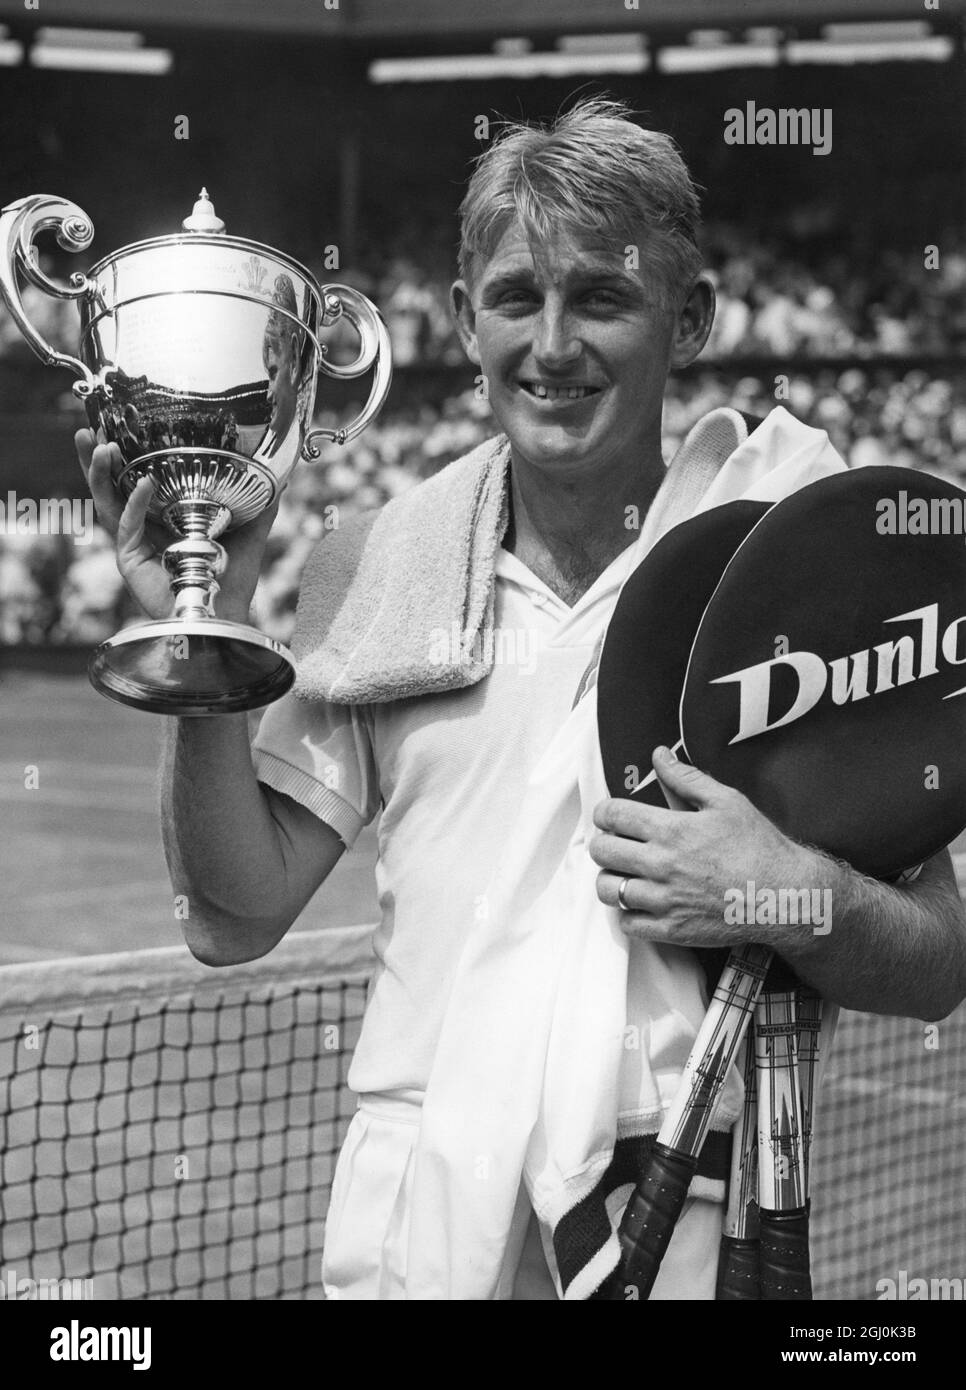 Lew Hoad (AUS) aged 22 - winner of the Men's Singles Final at Wimbledon on 5th July 1957. ©TopFoto *** Local Caption *** 1957 - L.A. Hoad Stock Photo